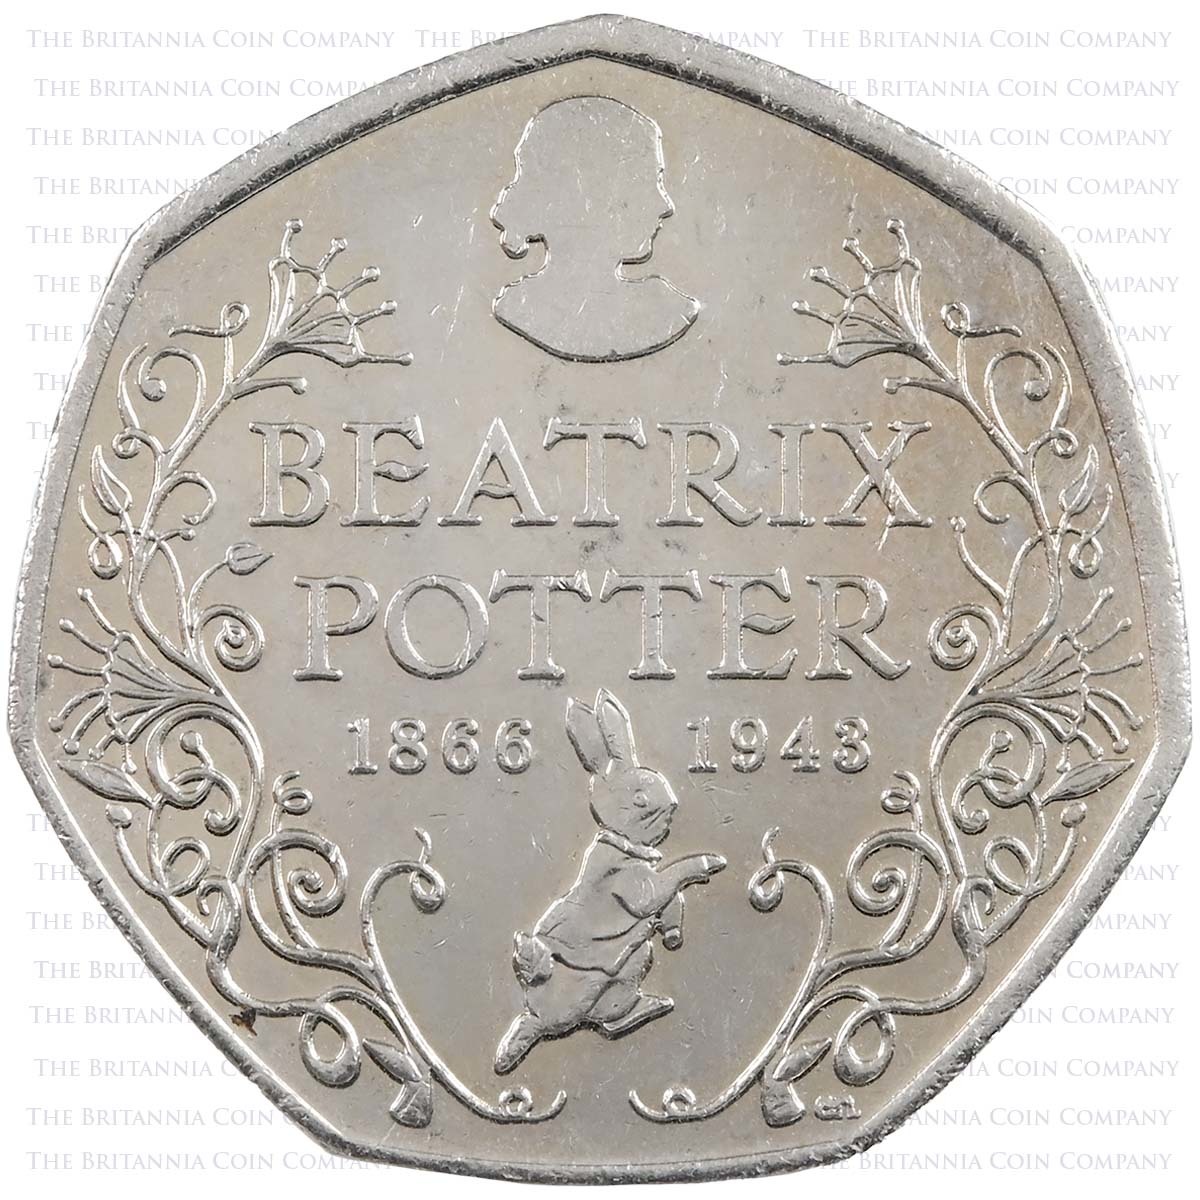 2016 Beatrix Potter 150th Anniversary Circulated Fifty Pence Coin Reverse